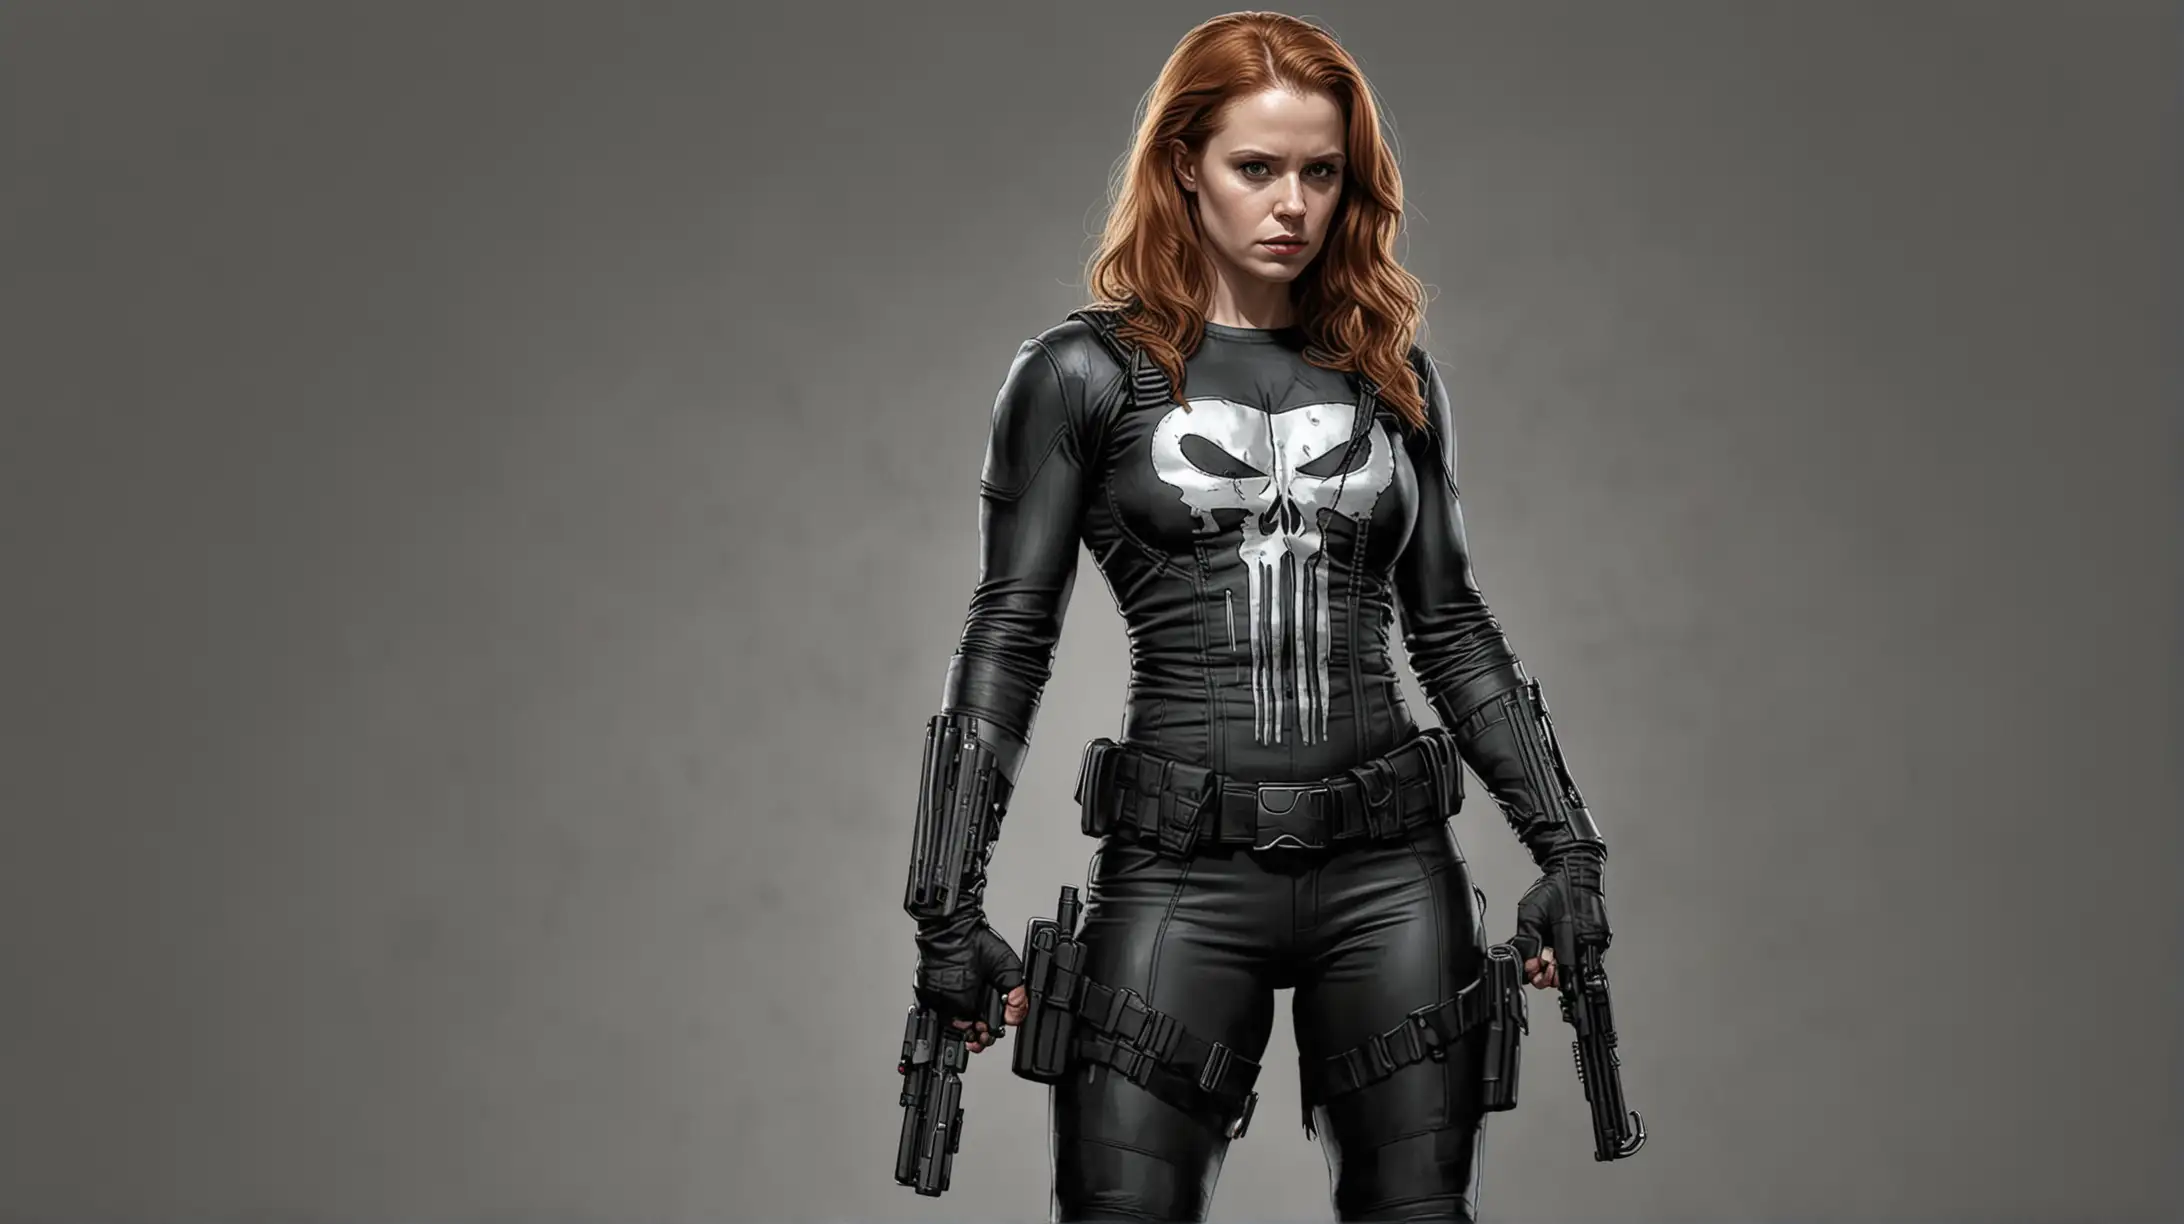 Amy Adams as Punisher Artwork Solo Portrayal of Marvel Character